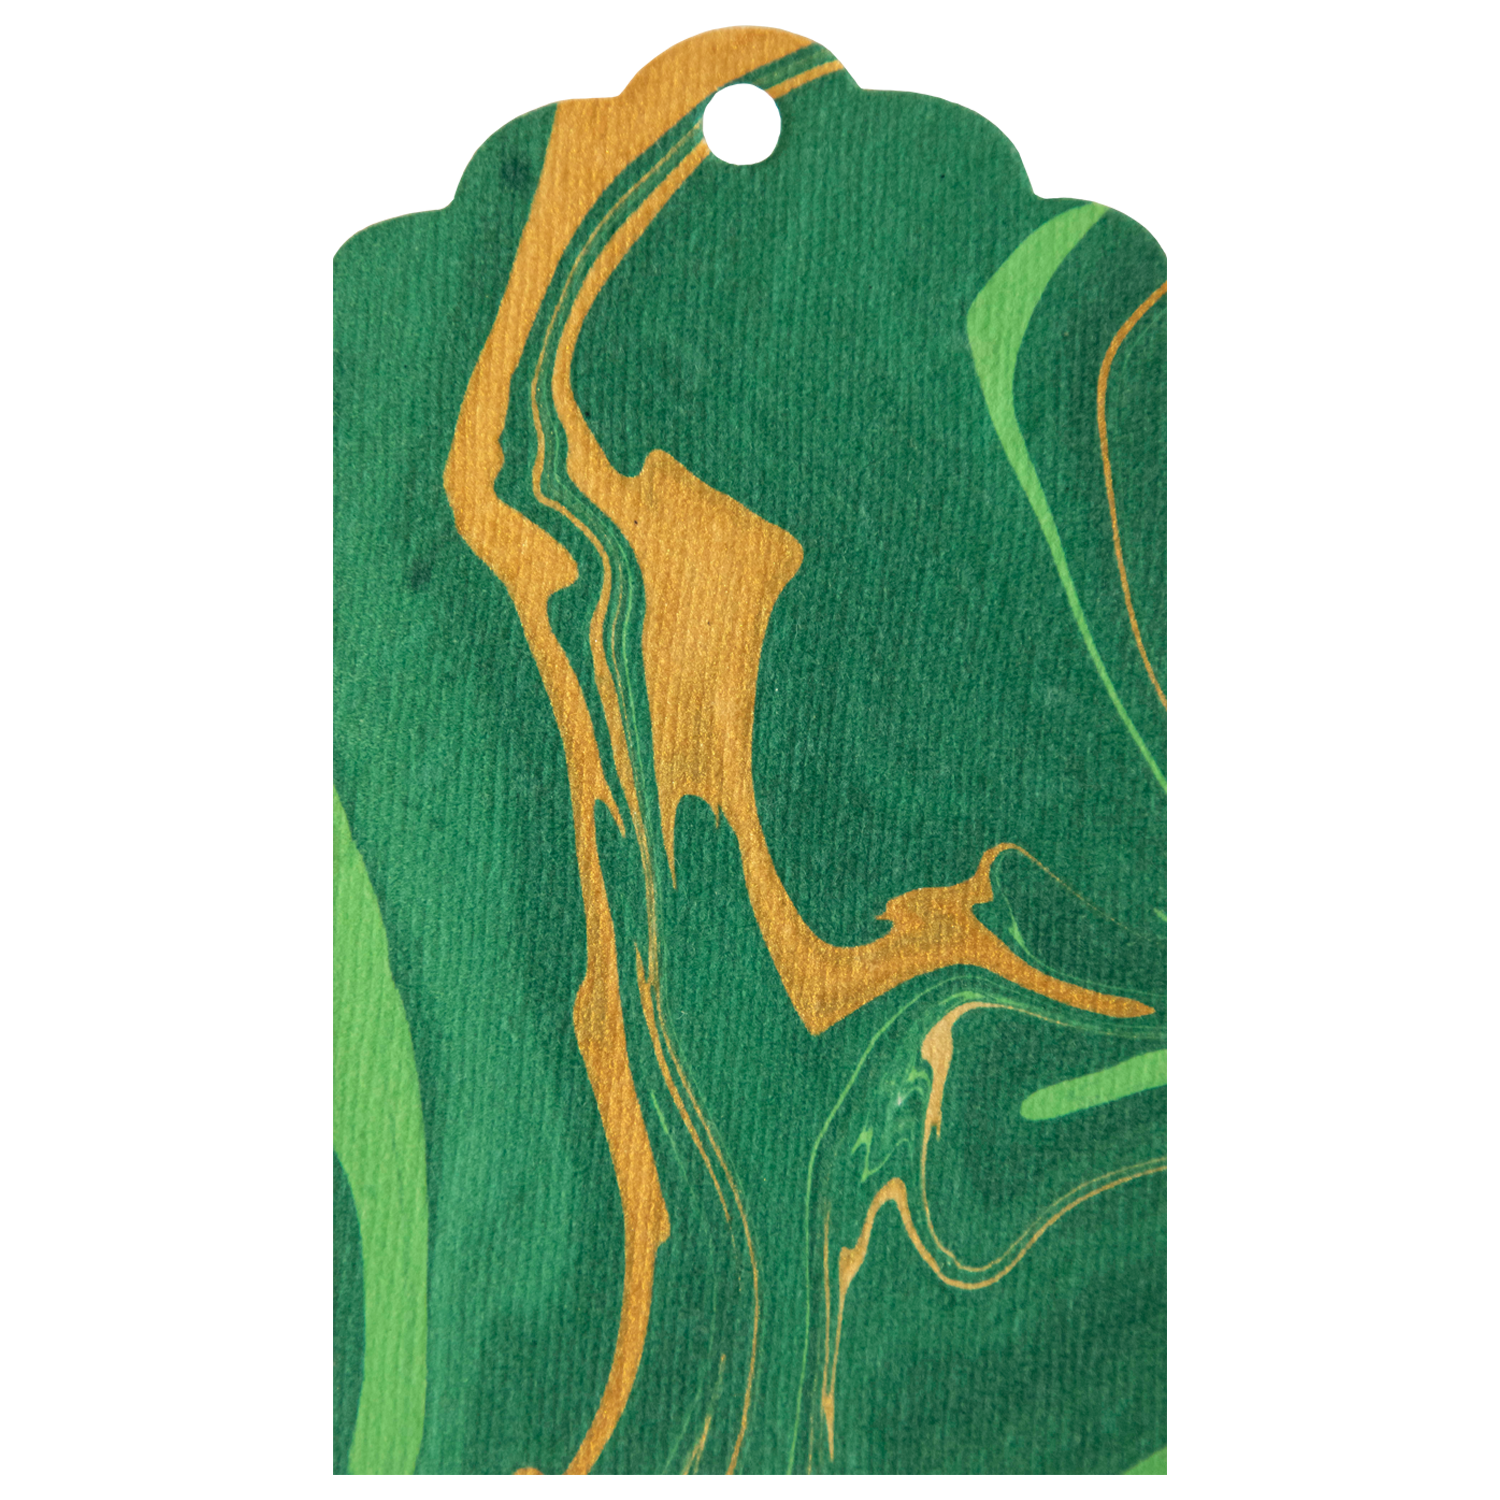 A unique image of a Hester &amp; Cook Vein Marbled Gift Tags.